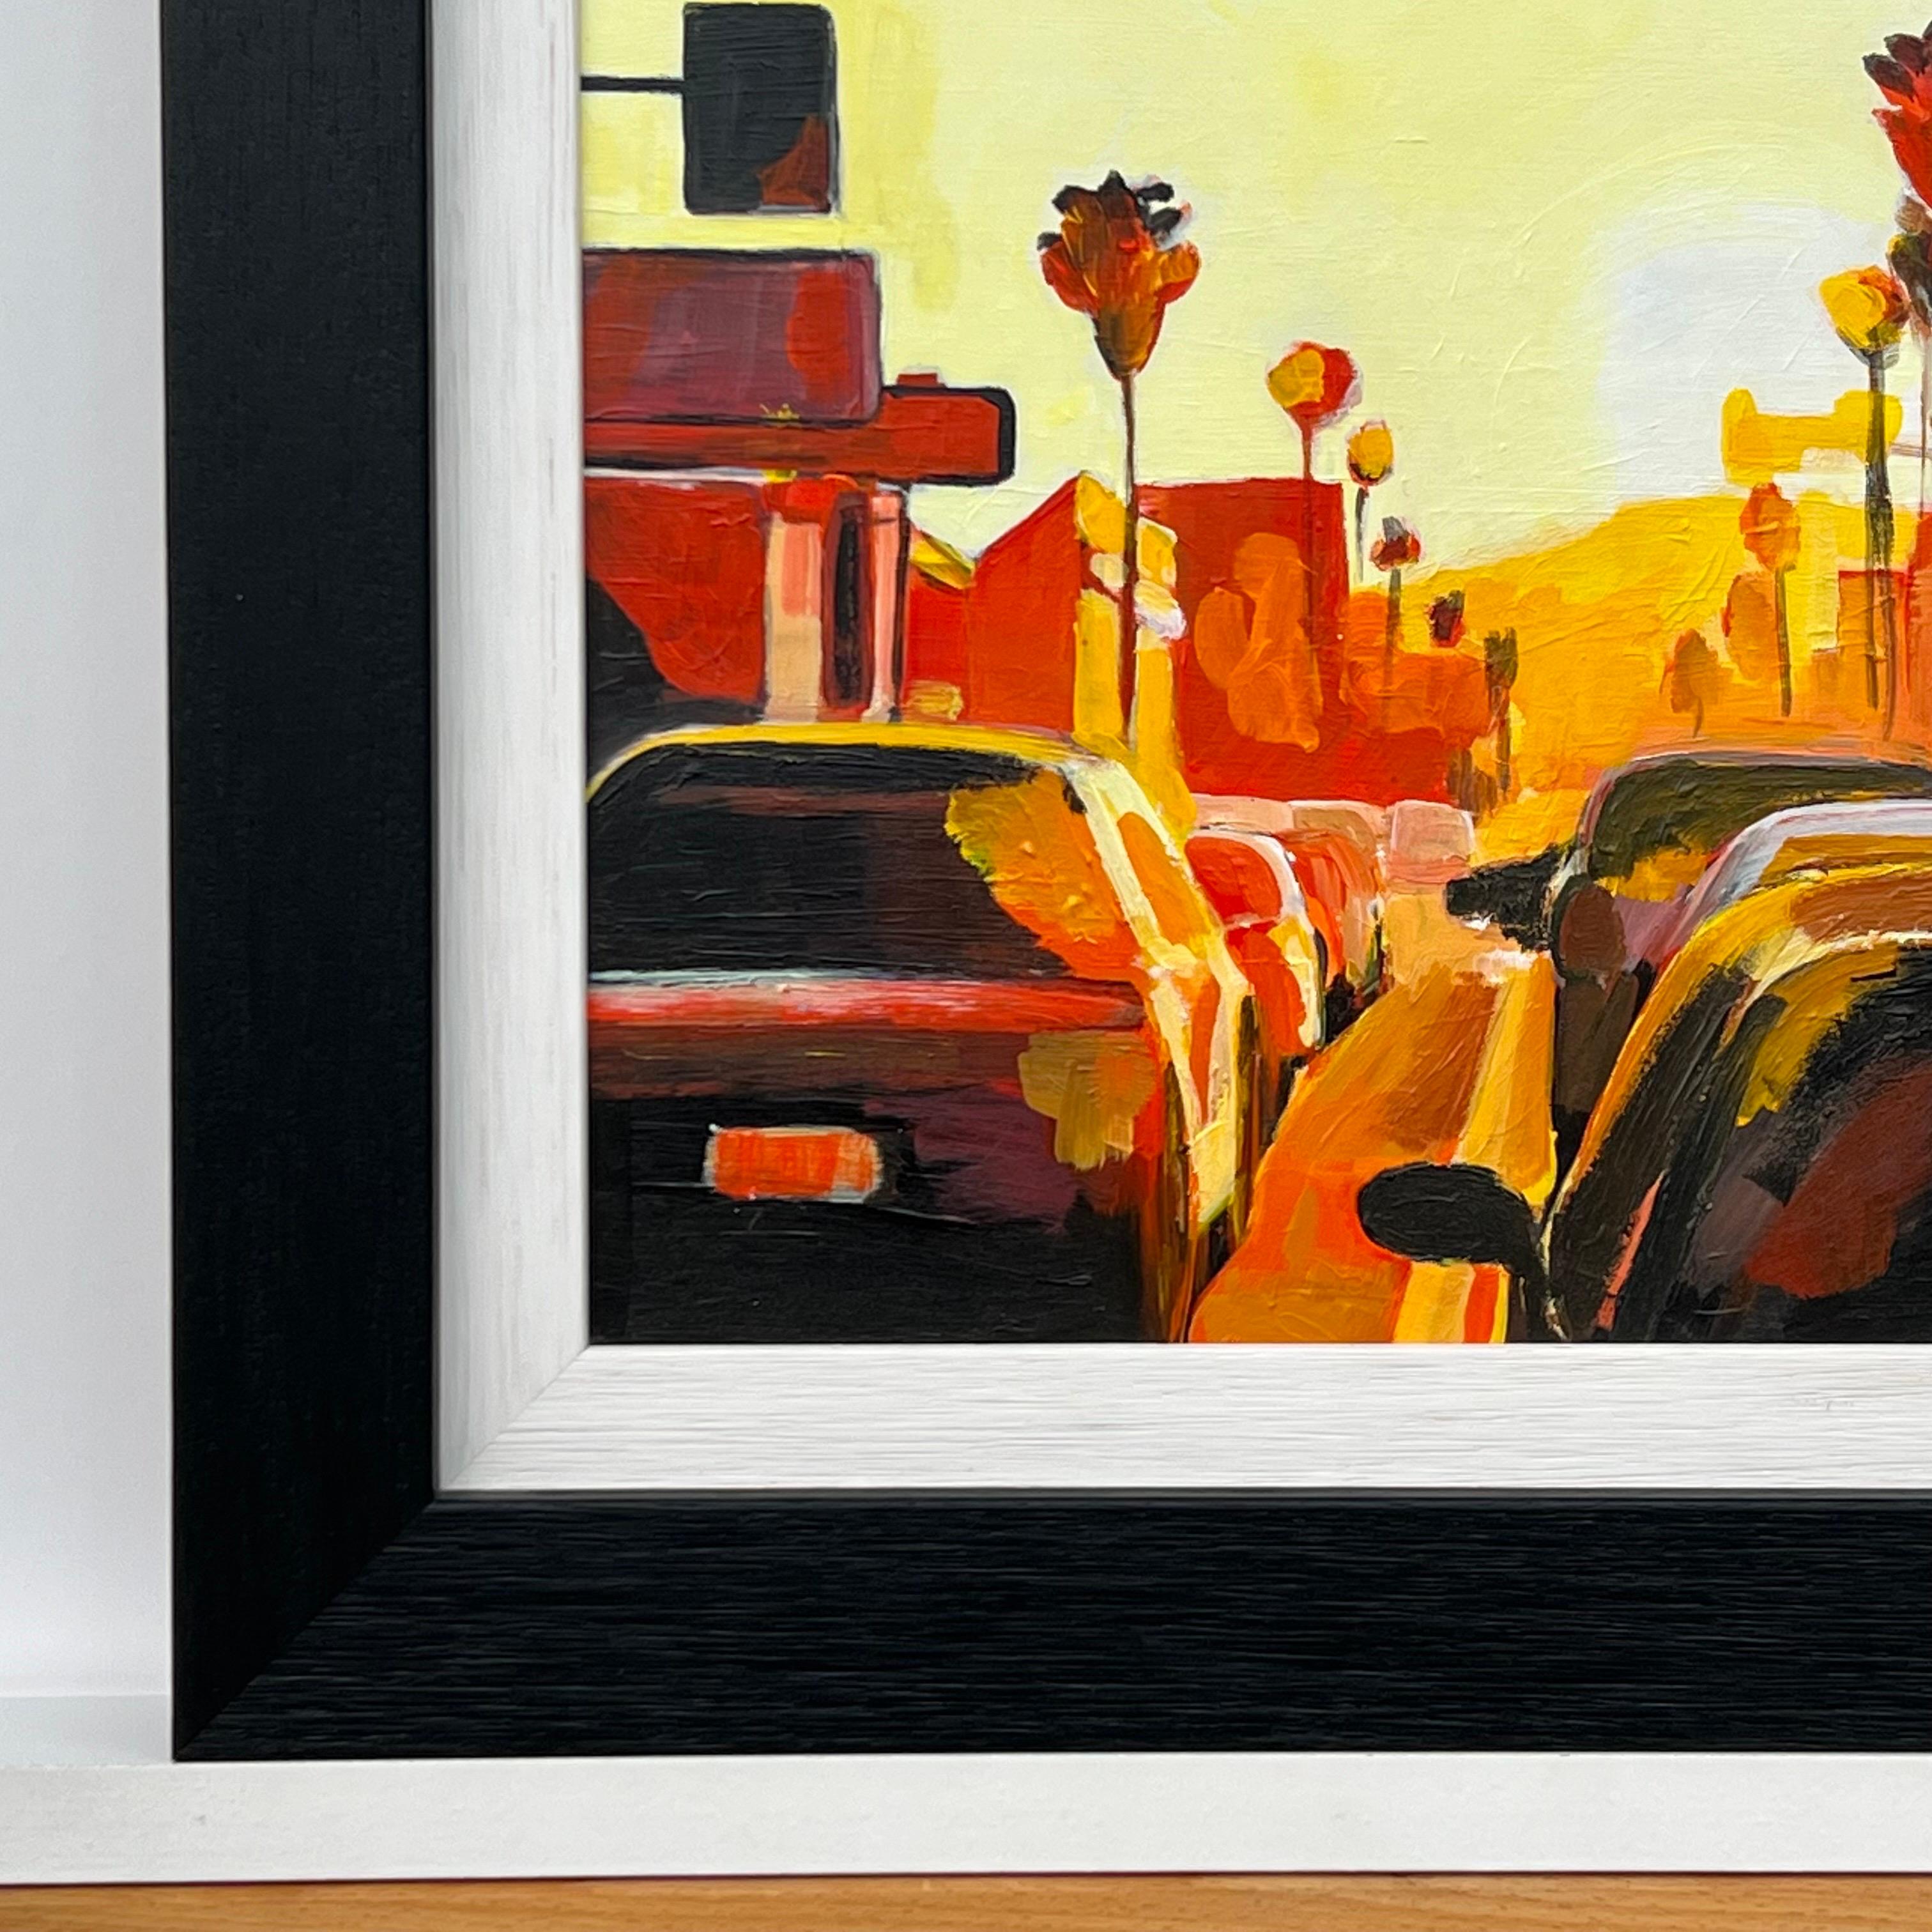 Los Angeles Traffic Street Scene Study with Sunshine & Palm Trees from the California Series by British Urban Landscape Artist, Angela Wakefield. 

At measures 12 x 12 inches
Frame measures 16 x 16 inches

Angela Wakefield has twice been on the